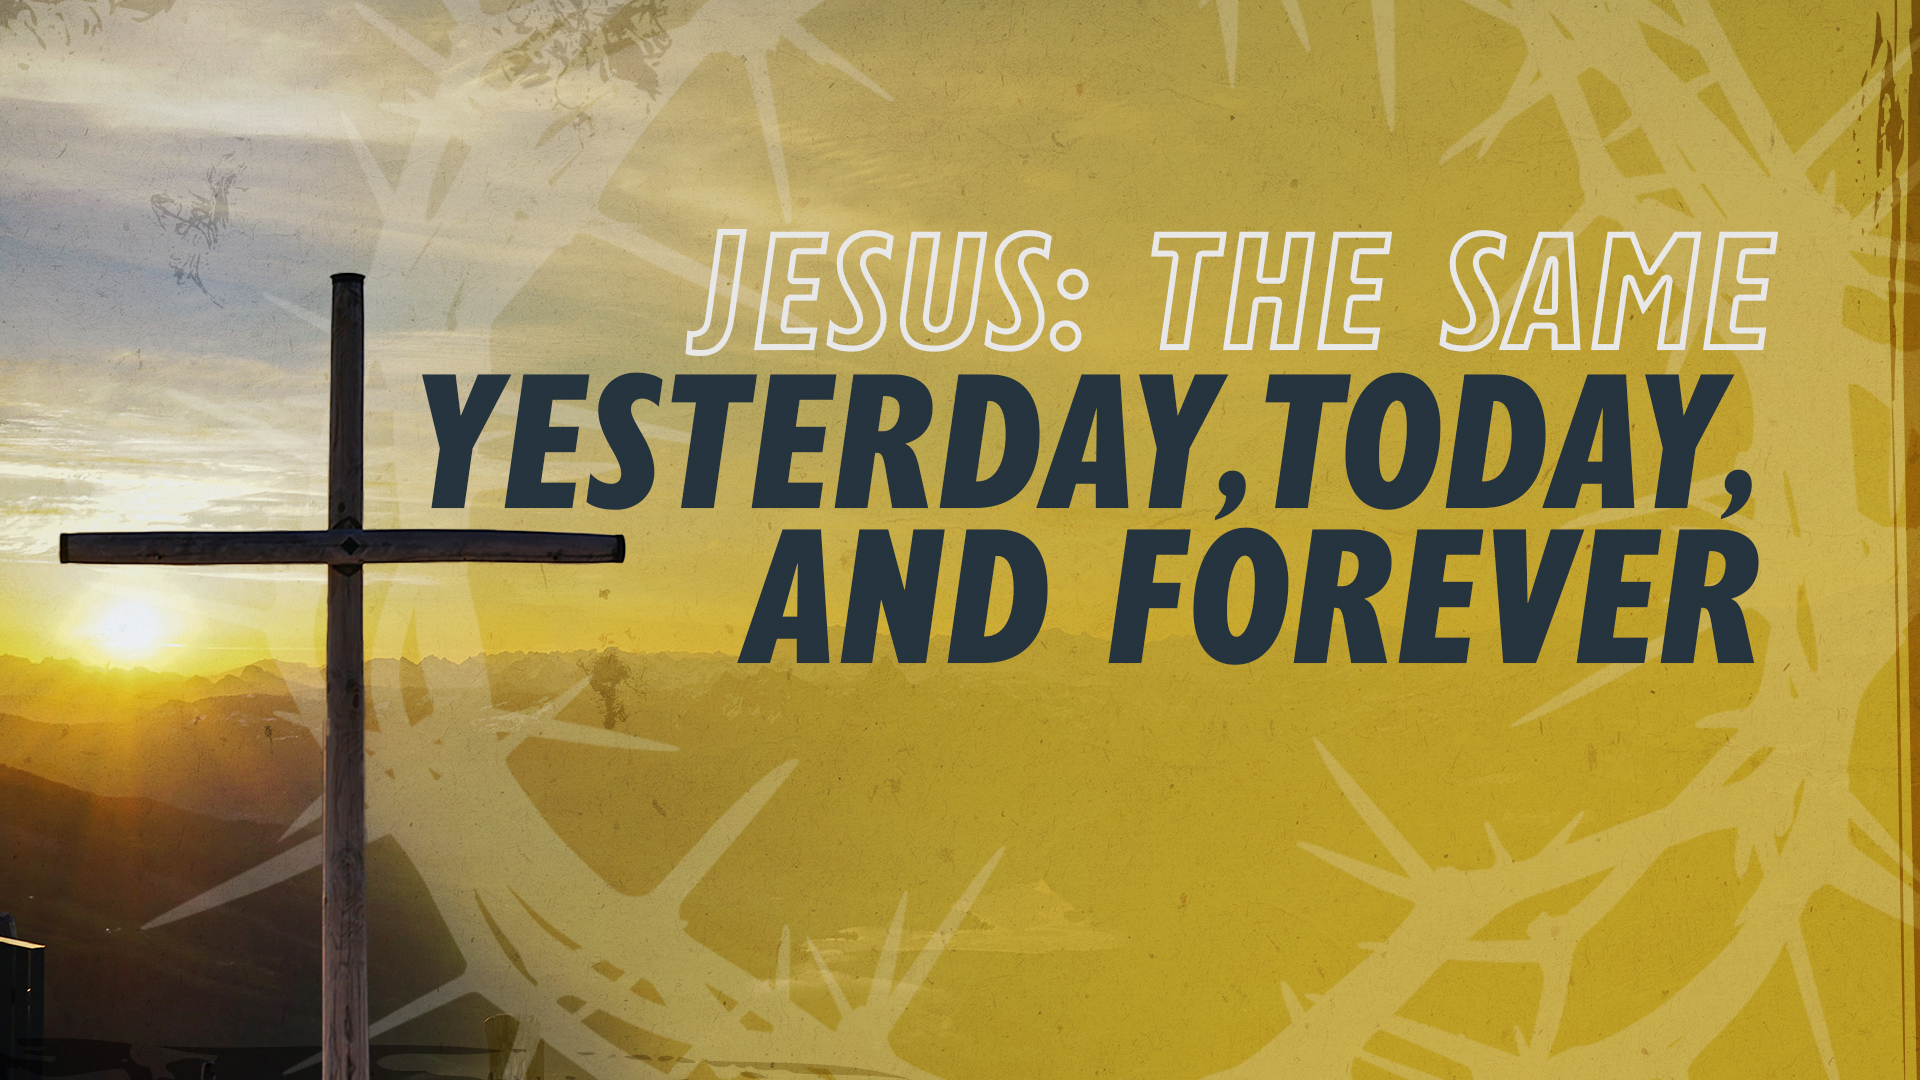 Jesus Christ: The Same Yesterday, Today, and Forever